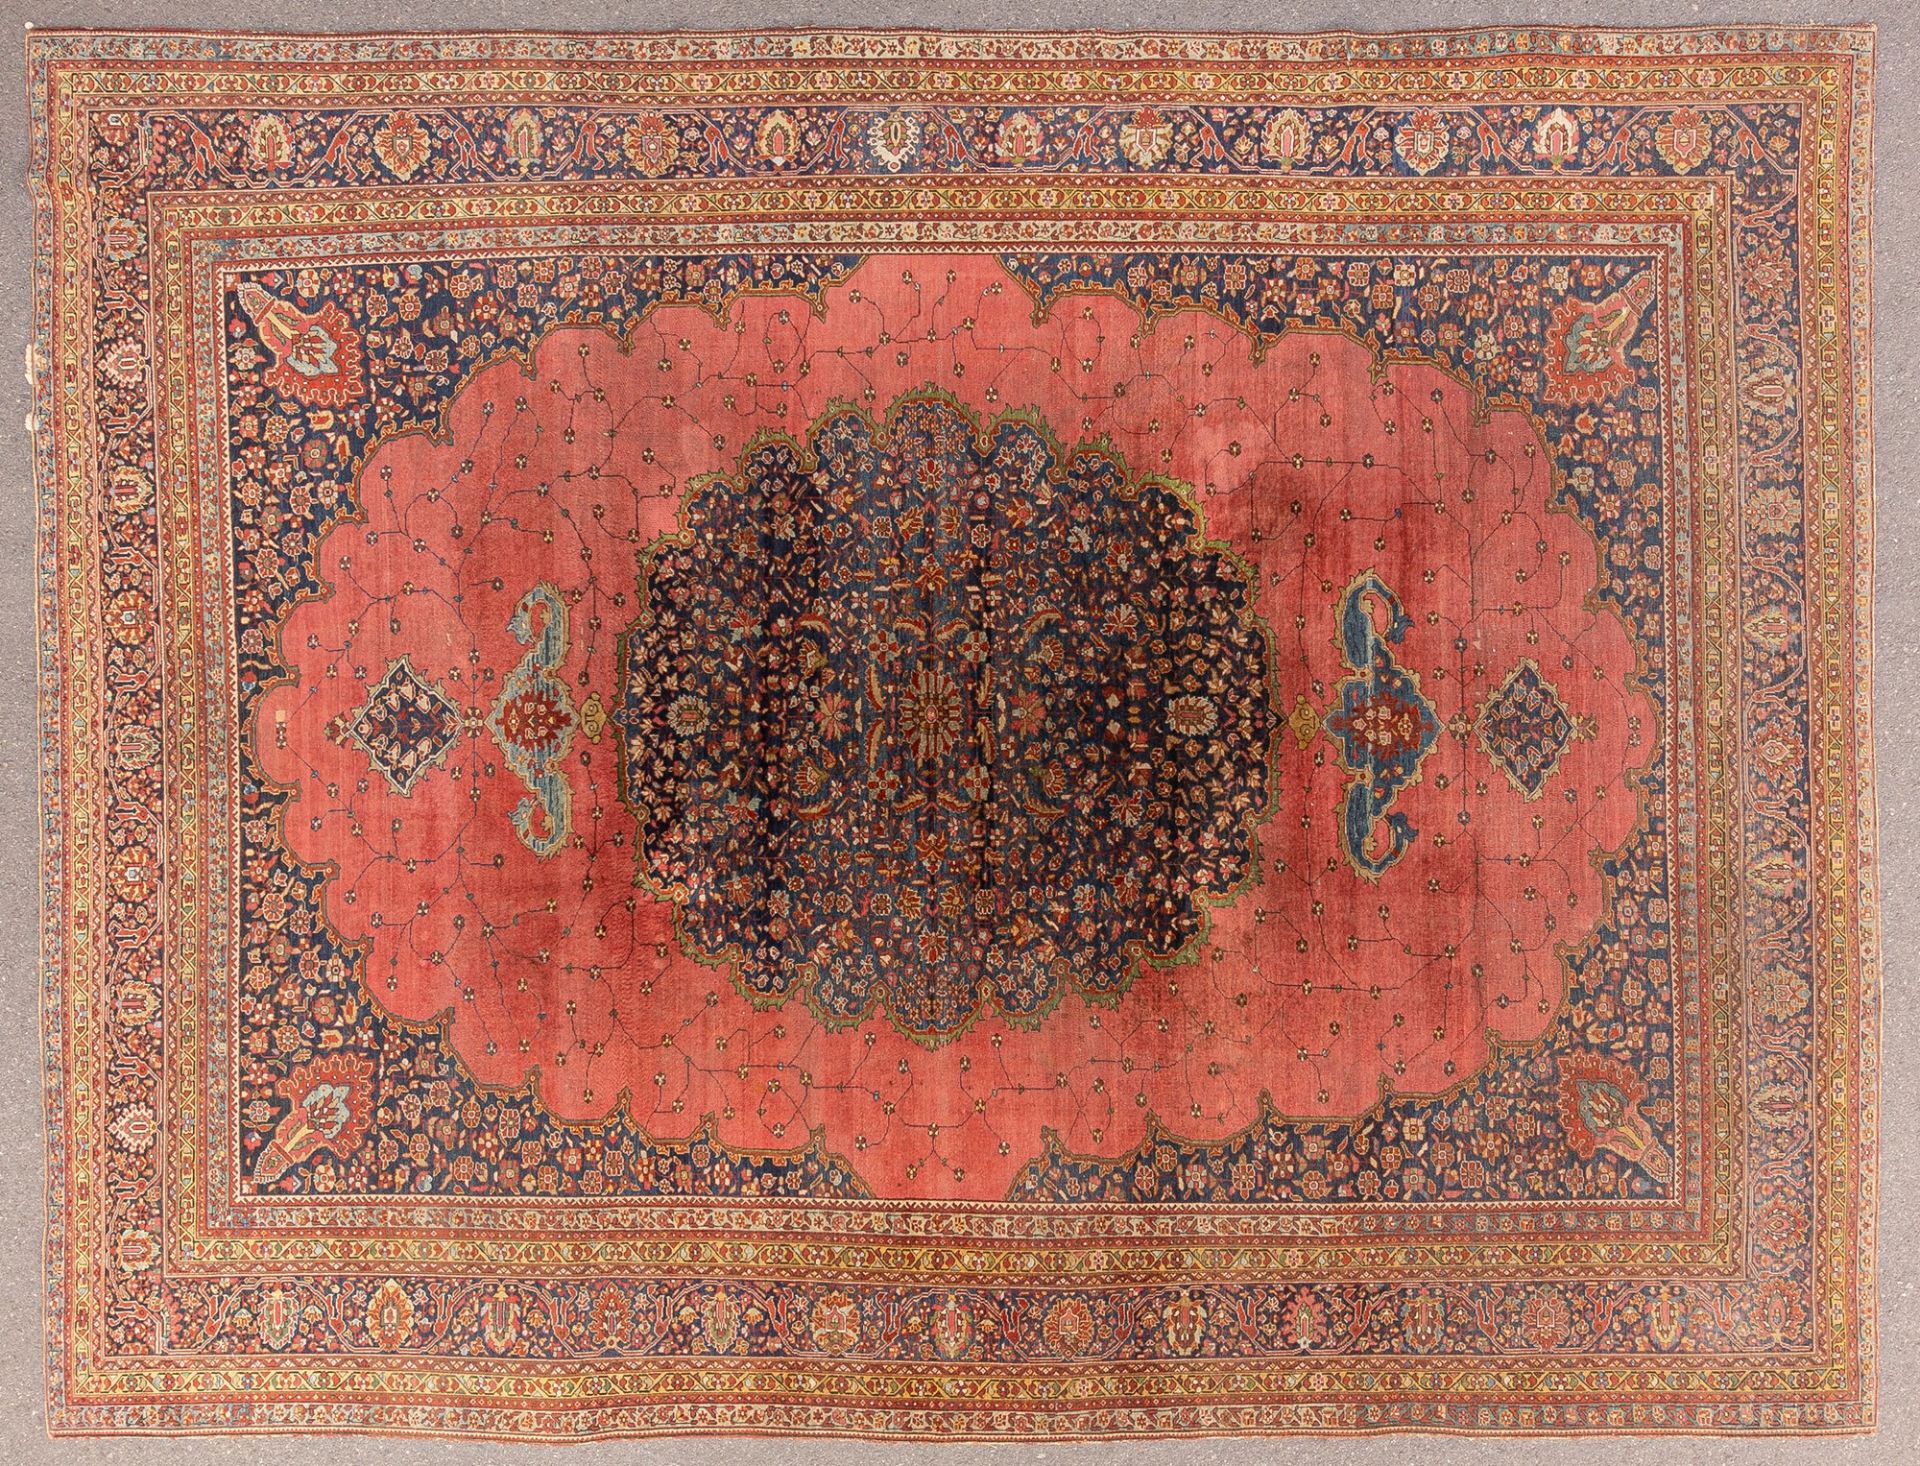 Persian carpet from the first half of the 20th century